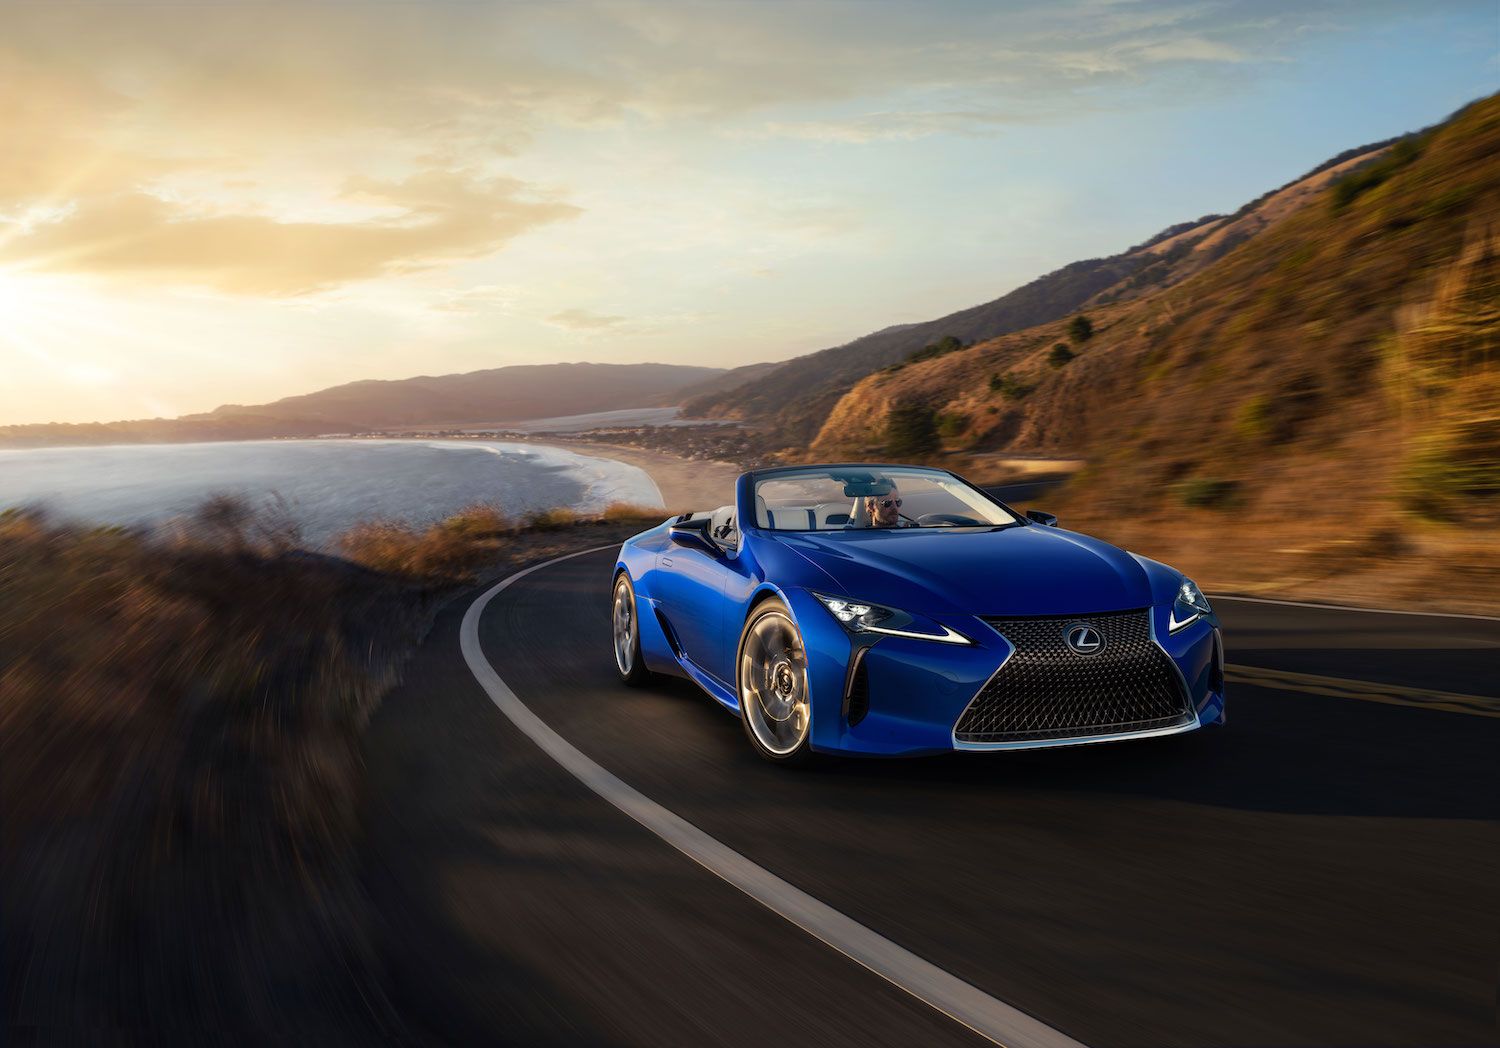 This uniquely blue 2021 Lexus LC 500 Convertible headed to charity